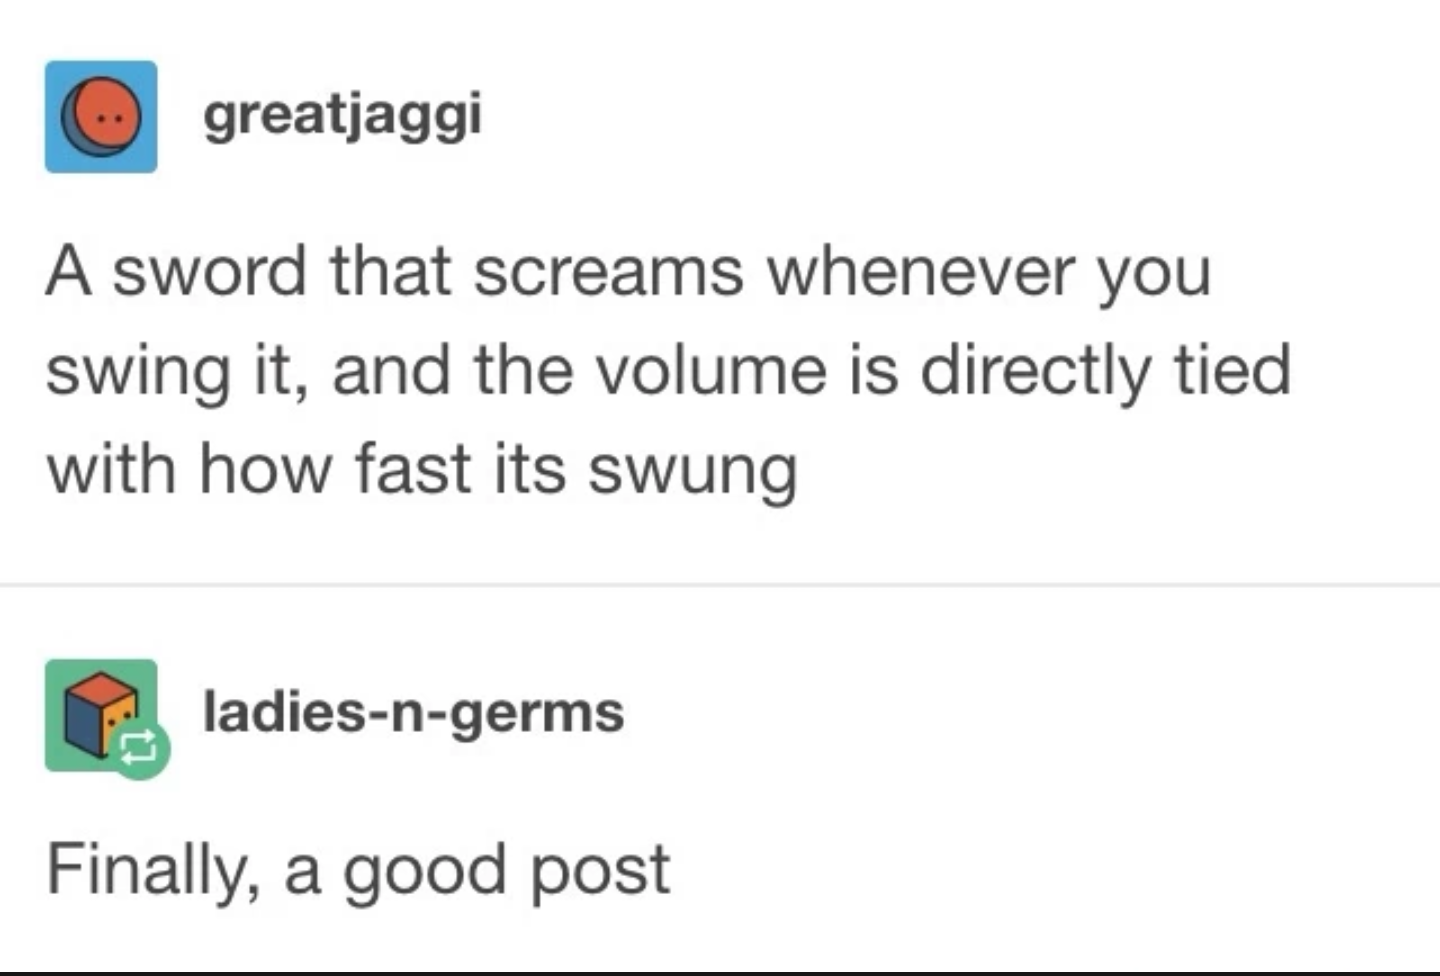 black clover text post - greatjaggi A sword that screams whenever you swing it, and the volume is directly tied with how fast its swung ladiesngerms Finally, a good post